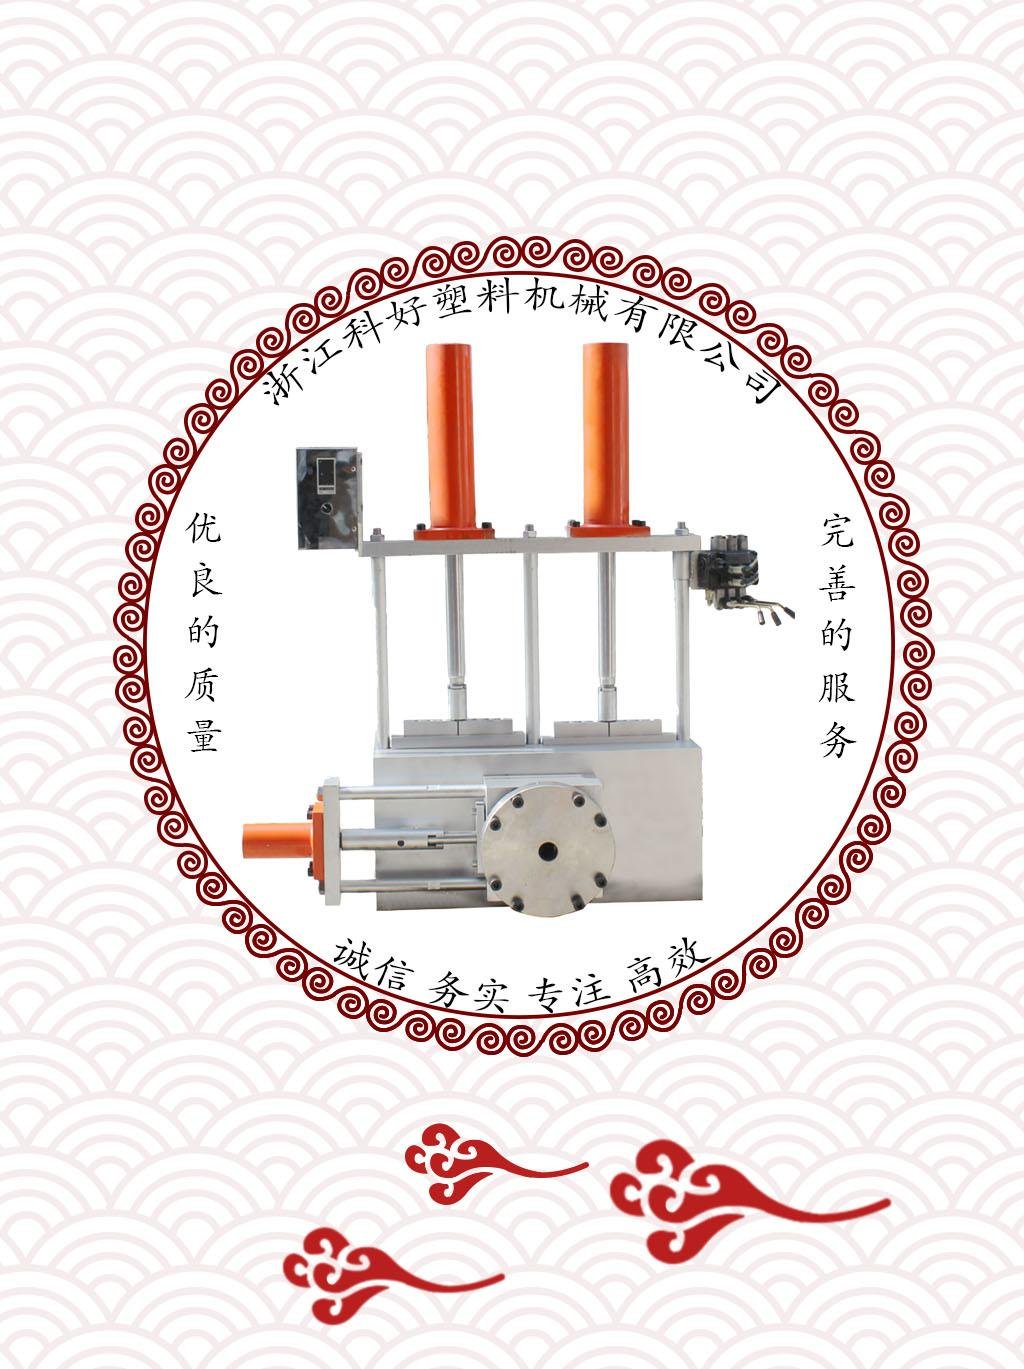 Mould head screen changer to ensure the quality of plastic machine 4